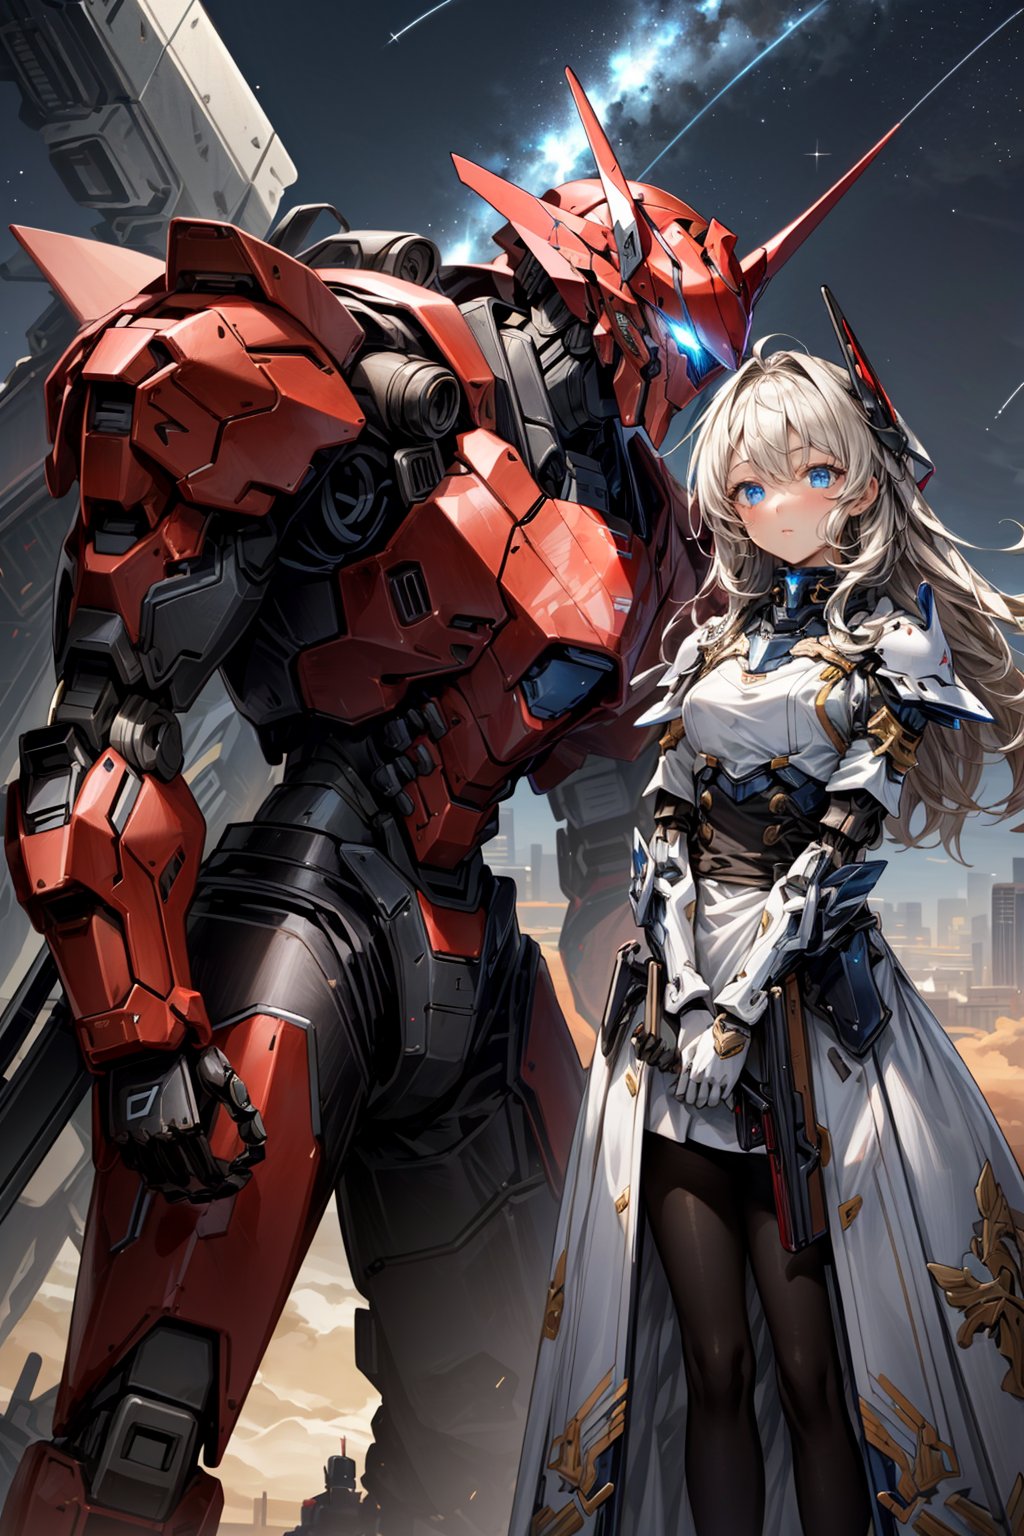 (masterpiece:1.4, best quality), (intricate details), unity 8k wallpaper, ultra detailed, intricate details, super complex details, ((2people)), (girl_standing_beside_robot:1.2), girl, (perfect detailed face, detailed eyes, white dress),
BREAK
robot, (giant mecha, red and black armor, blue eyes, holding rifle), starry sky, skyline, Mecha